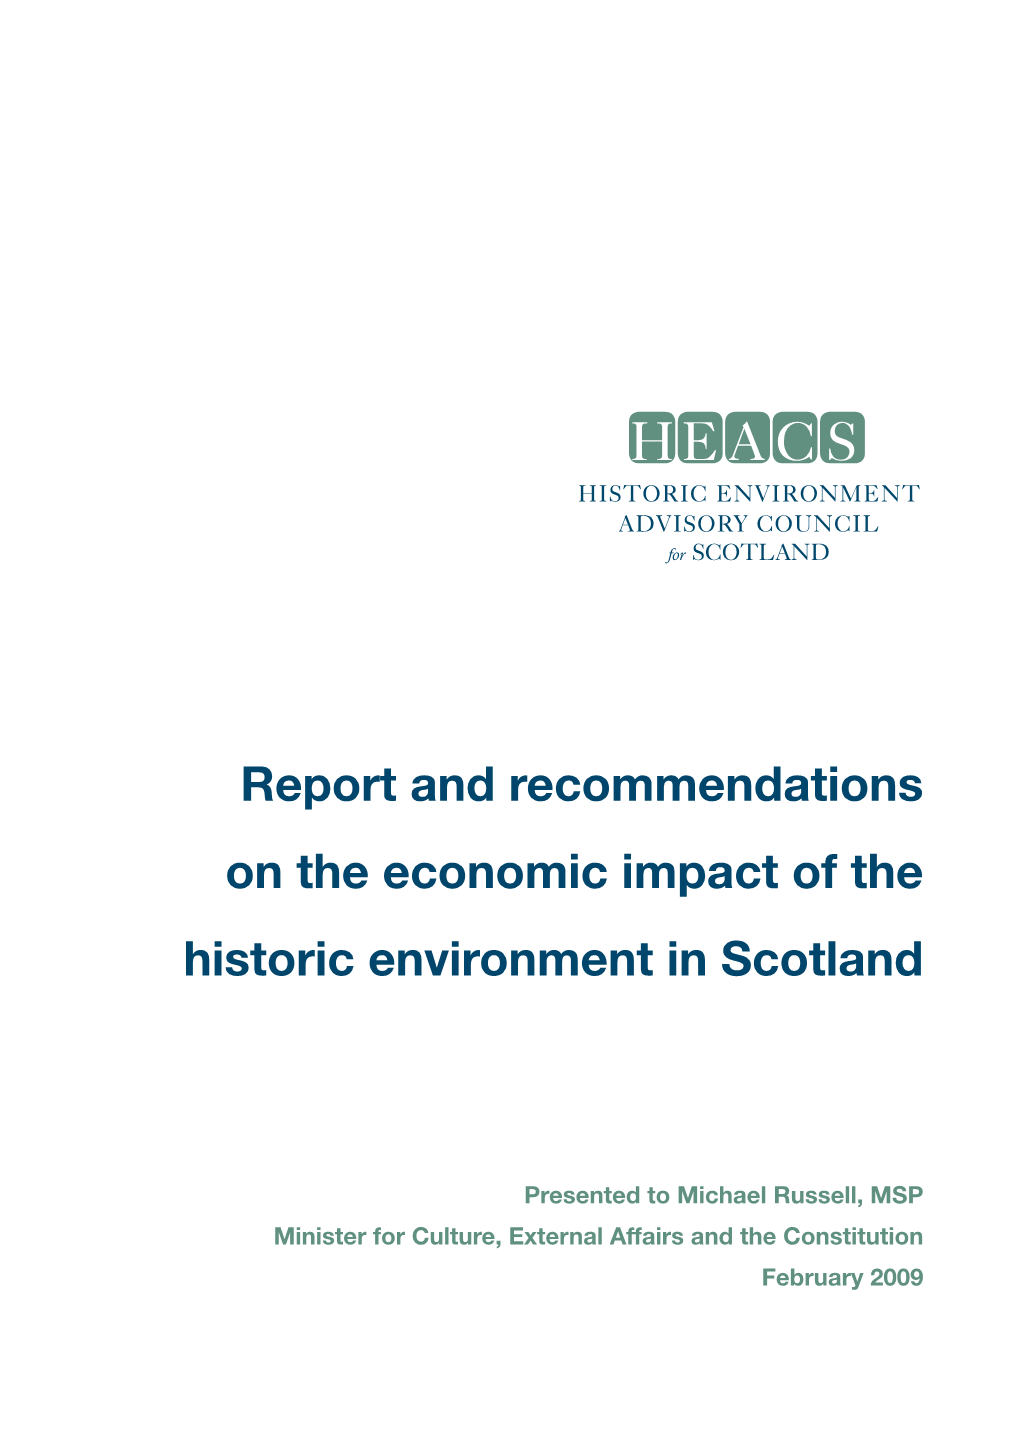 Report and Recommendations on the Economic Impact of the Historic Environment in Scotland HE ACS Historic Environment Advisory Council for Scotland